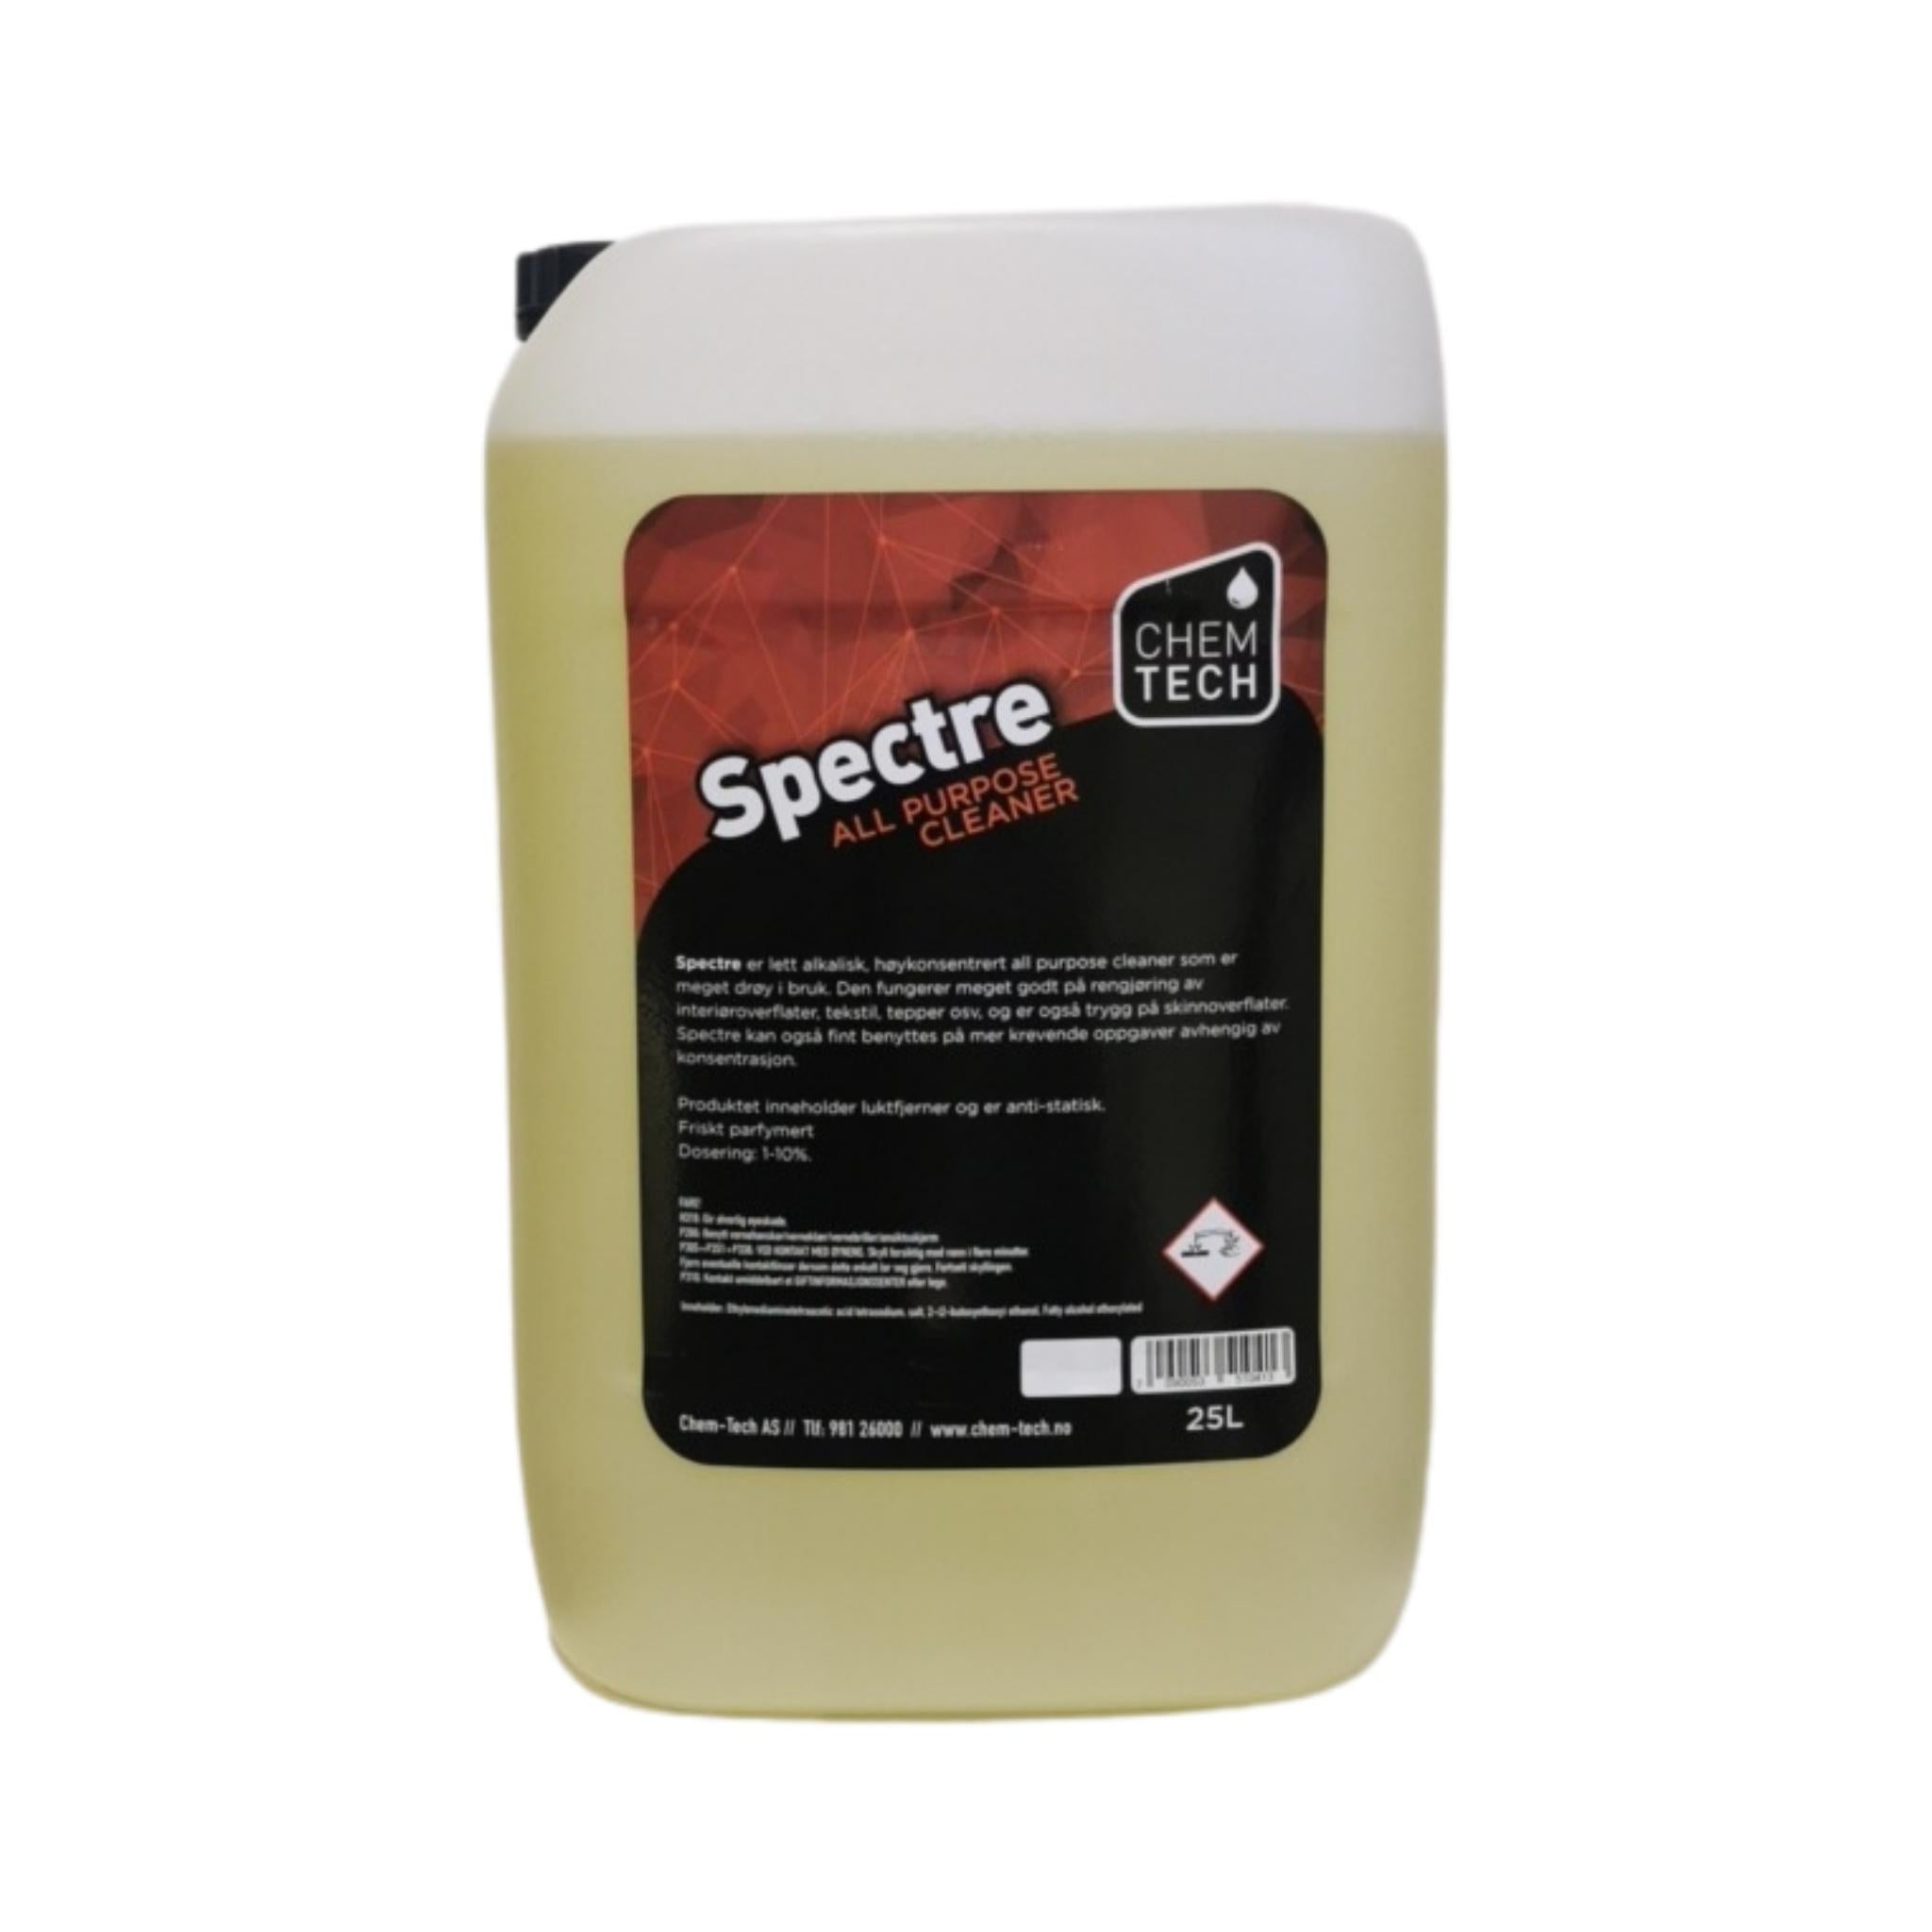 SPECTRE ALL PURPOSE CLEANER 25 LTR